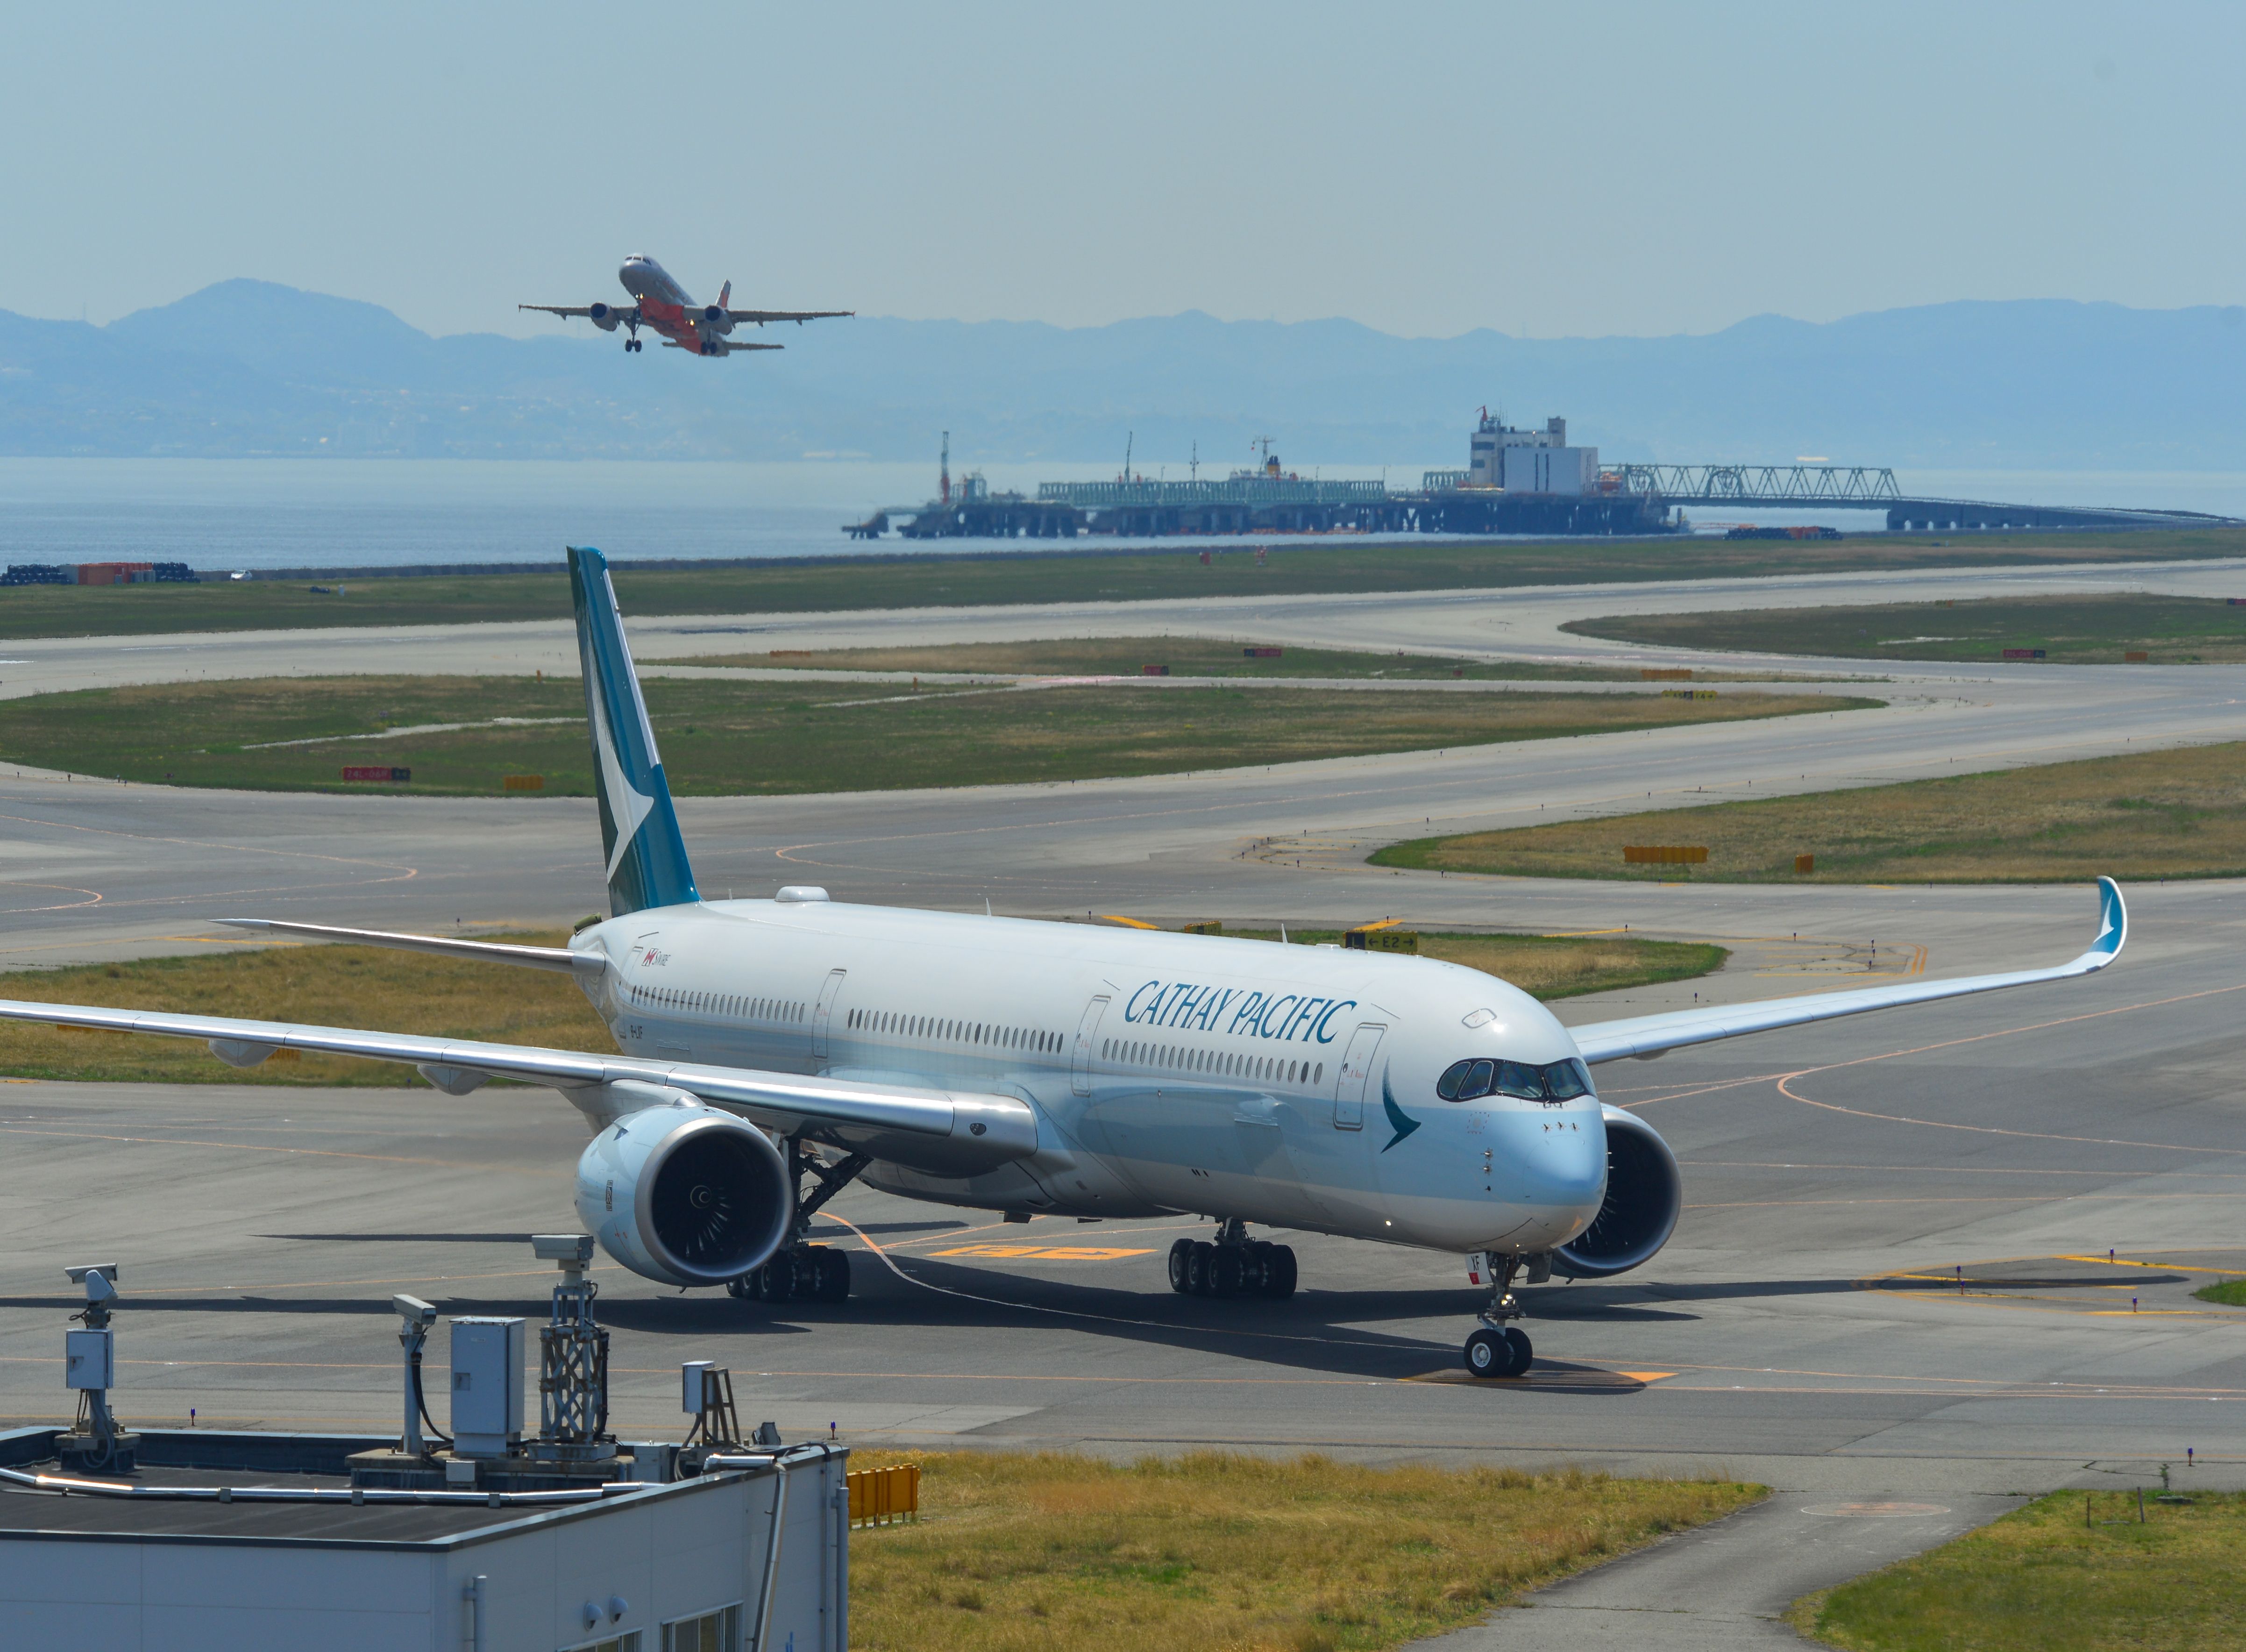 A Cathay Pacific Airbus A350 on the apron at Kansai International Airport.